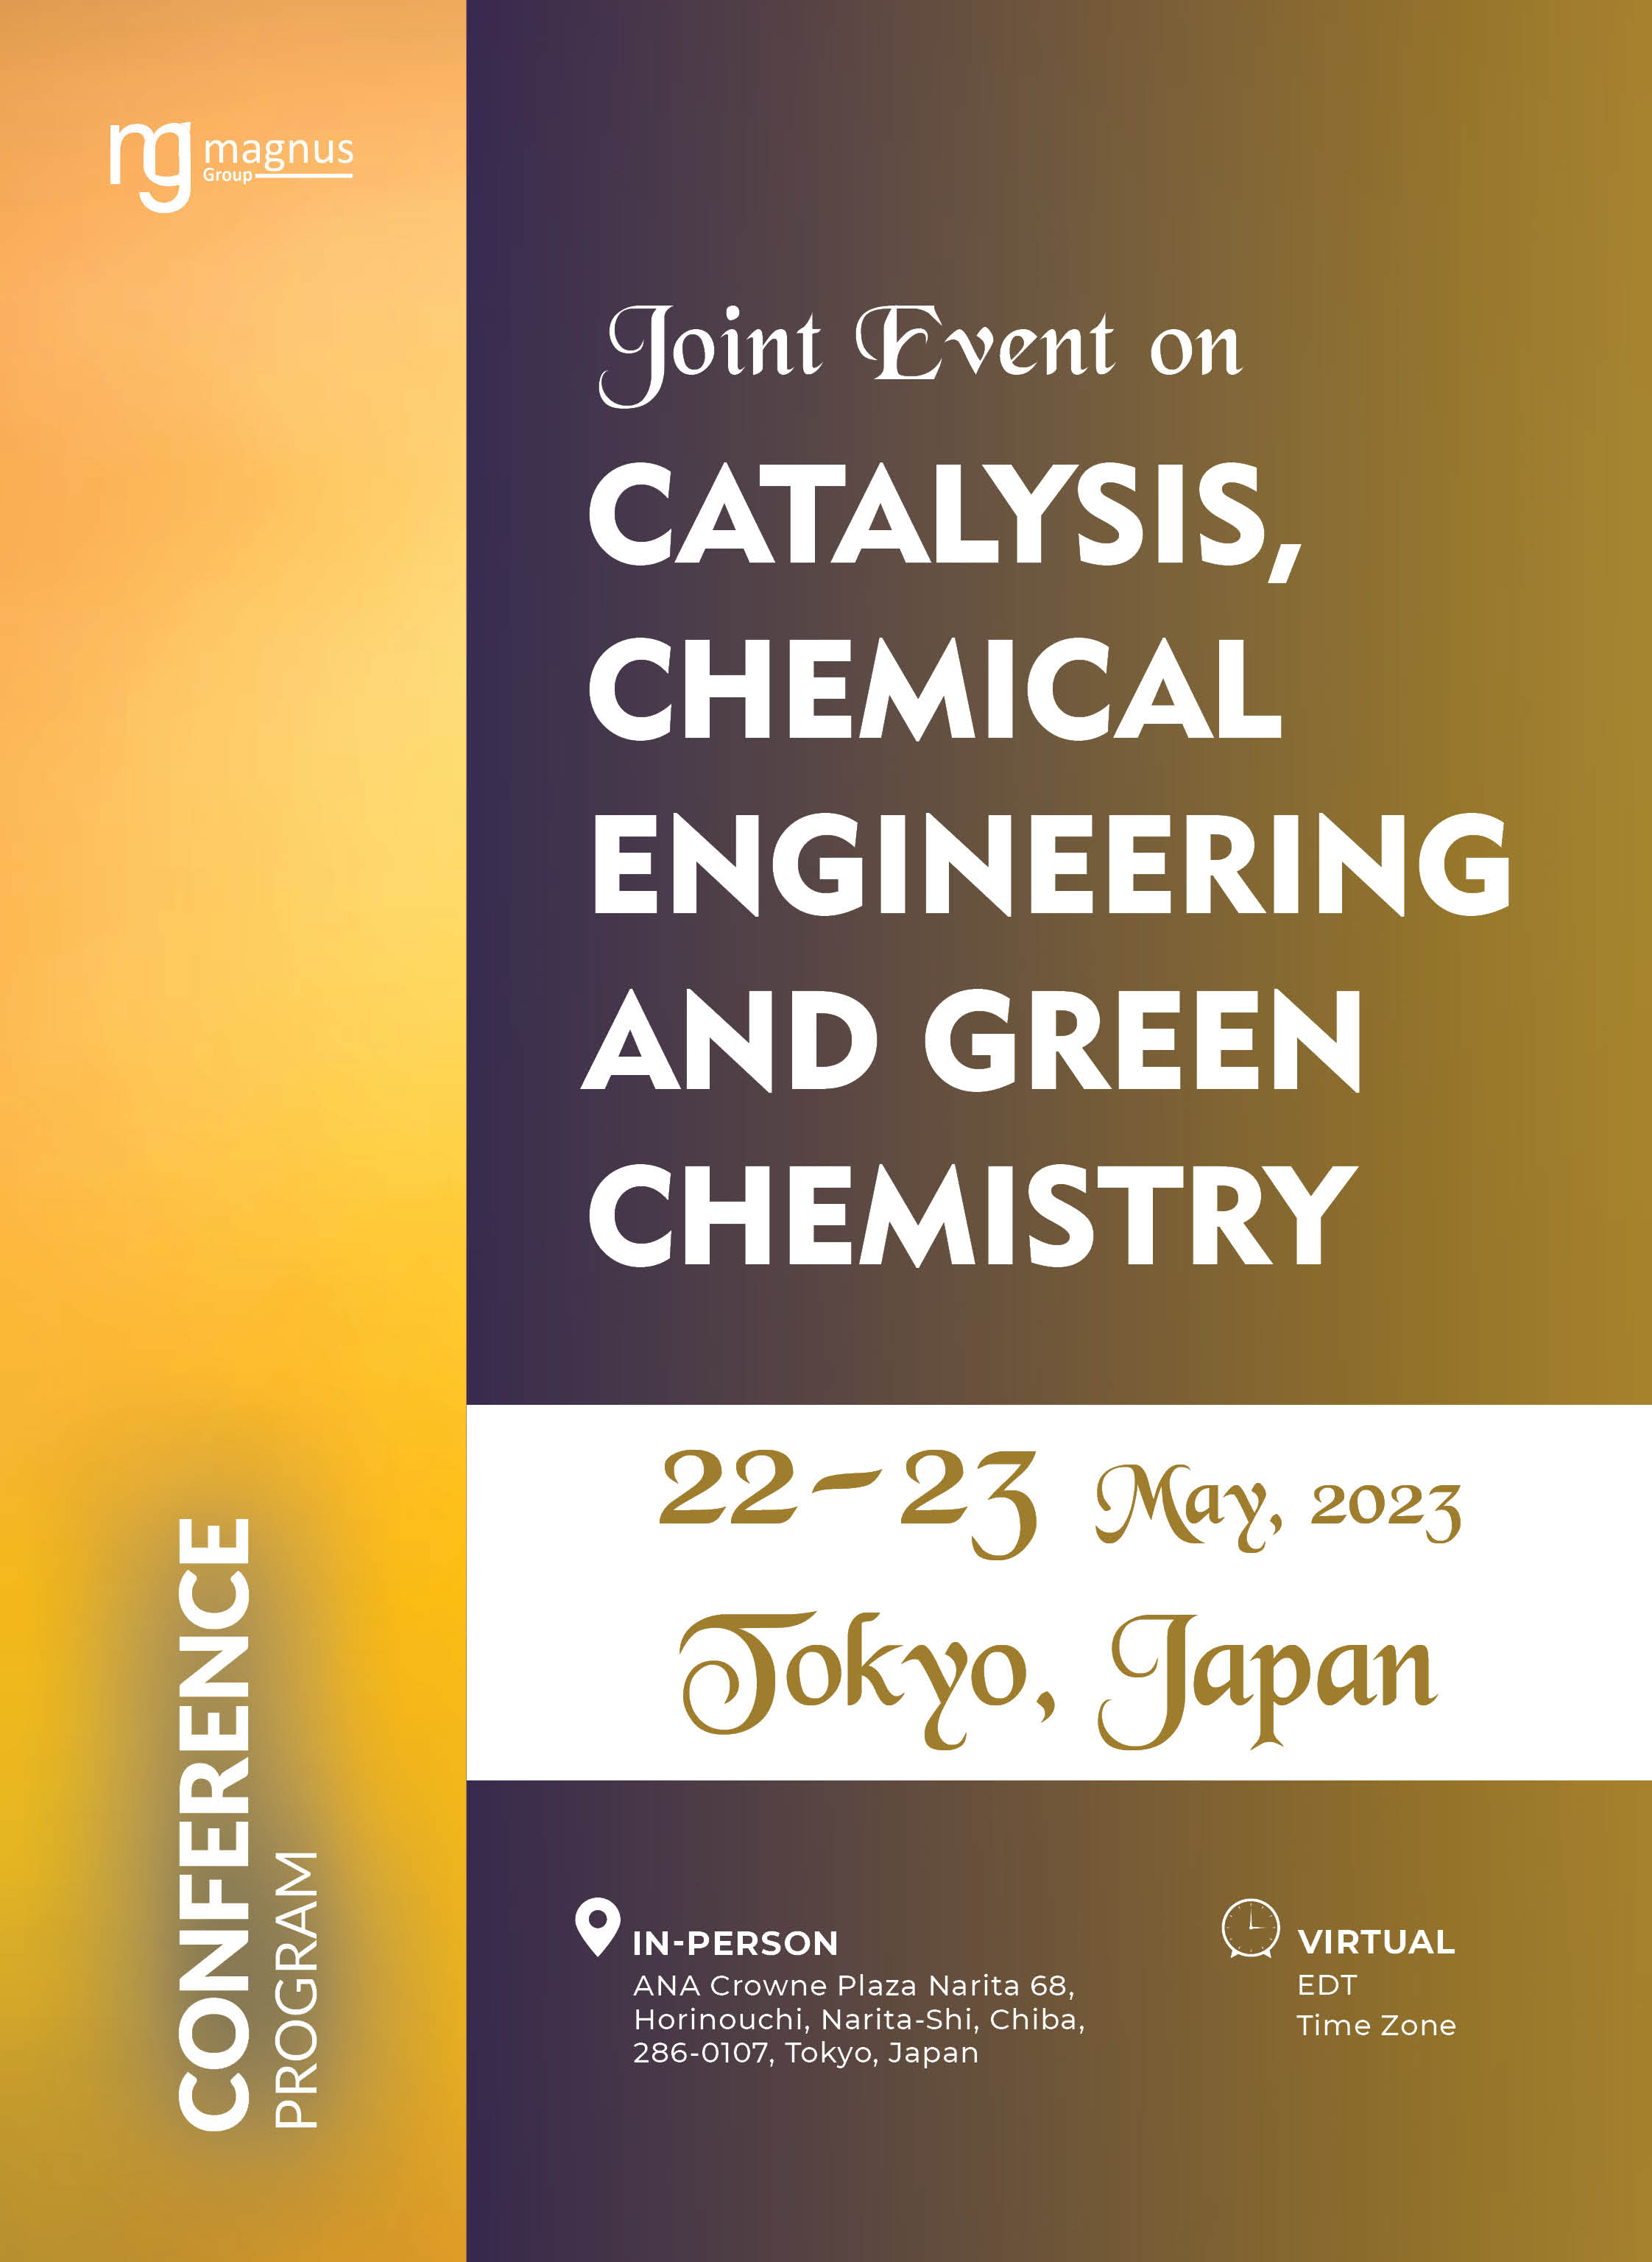 15th Edition of International Conference on  Catalysis, Chemical Engineering and Technology | Tokyo, Japan Program